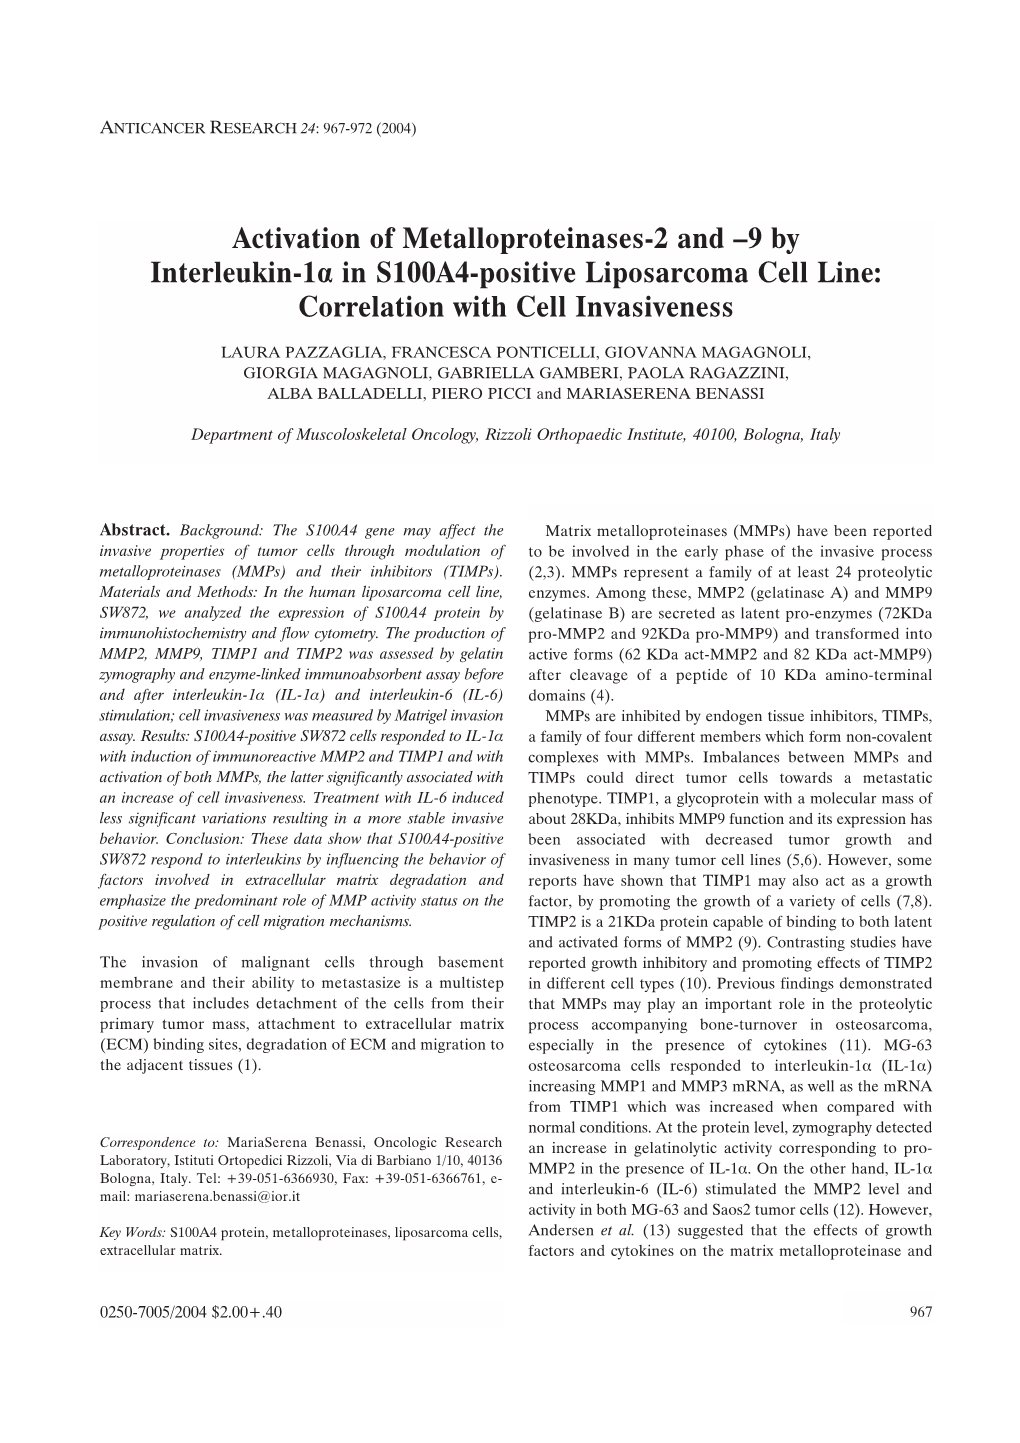 9 by Interleukin-1· in S100A4-Positive Liposarcoma Cell Line: Correlation with Cell Invasiveness